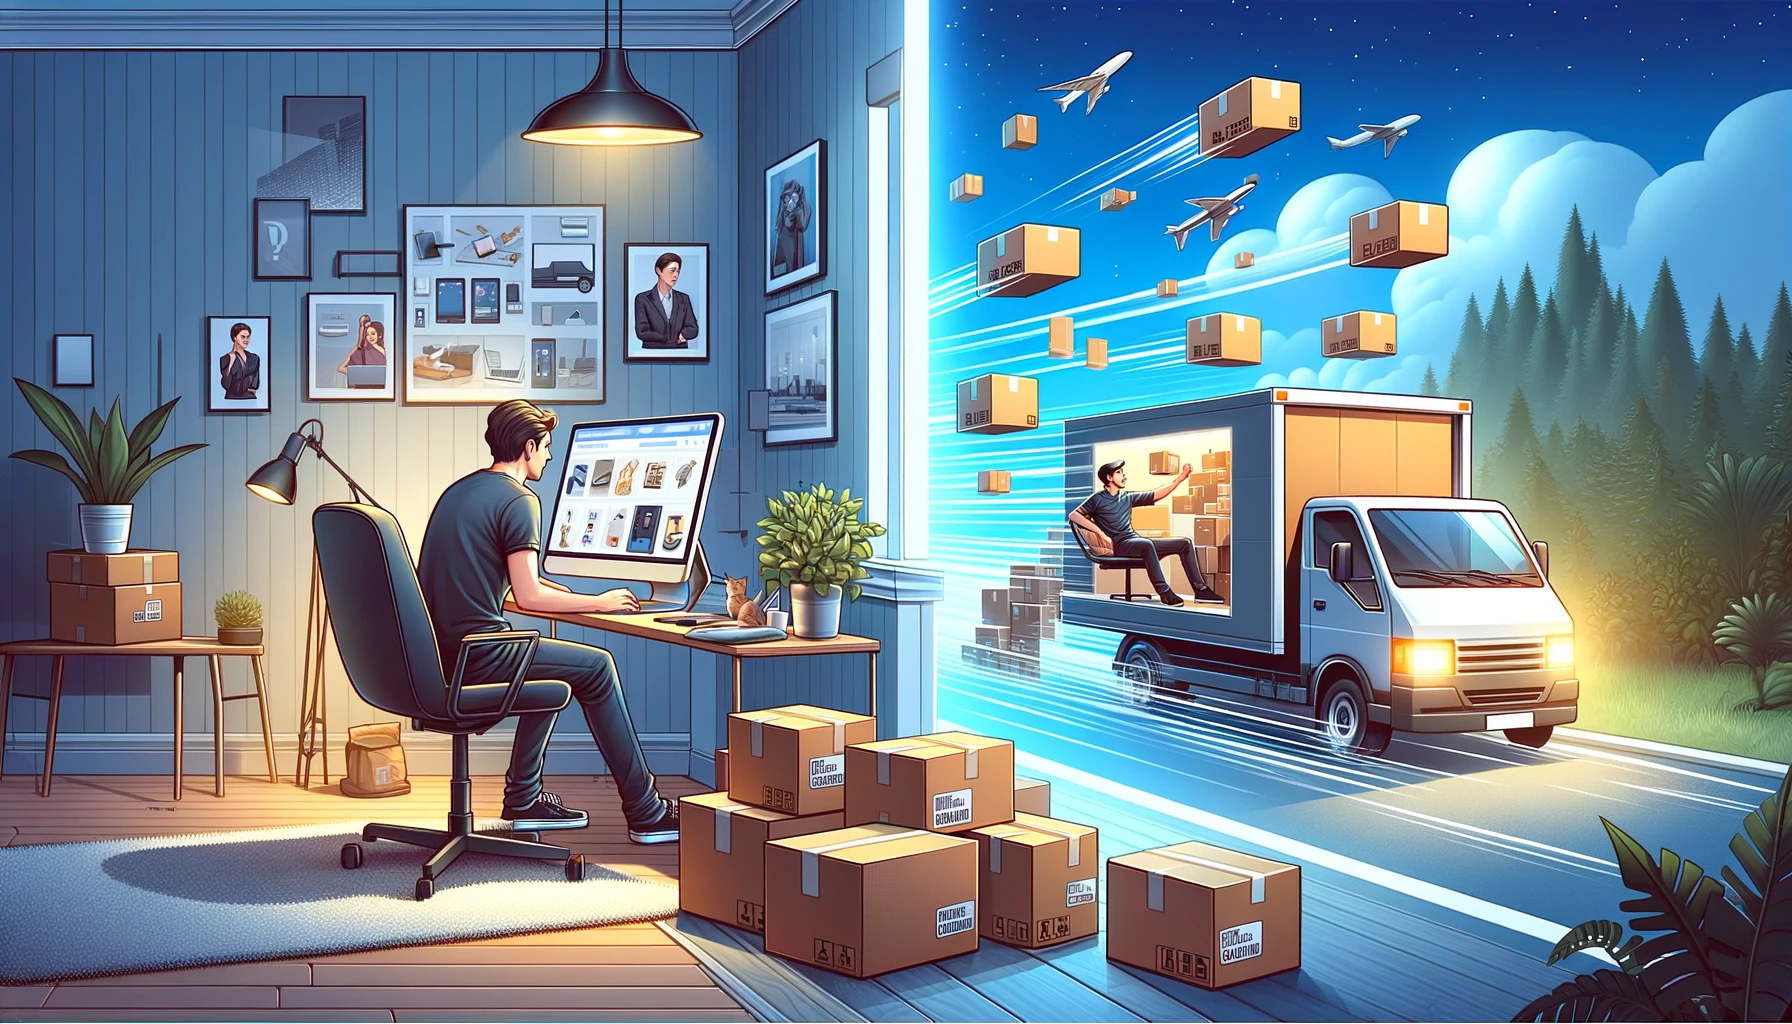 The image illustrates a dynamic scene representing the e-commerce process. On the left, a person is seated at a computer in a well-lit home office, intently shopping online, surrounded by virtual images of diverse products on the screen, suggesting a wide selection of items available for purchase. On the right, another individual is outside in daylight, actively loading cardboard boxes into the back of a delivery van, with some boxes bearing visible e-commerce logos, indicating they are online orders ready for shipment